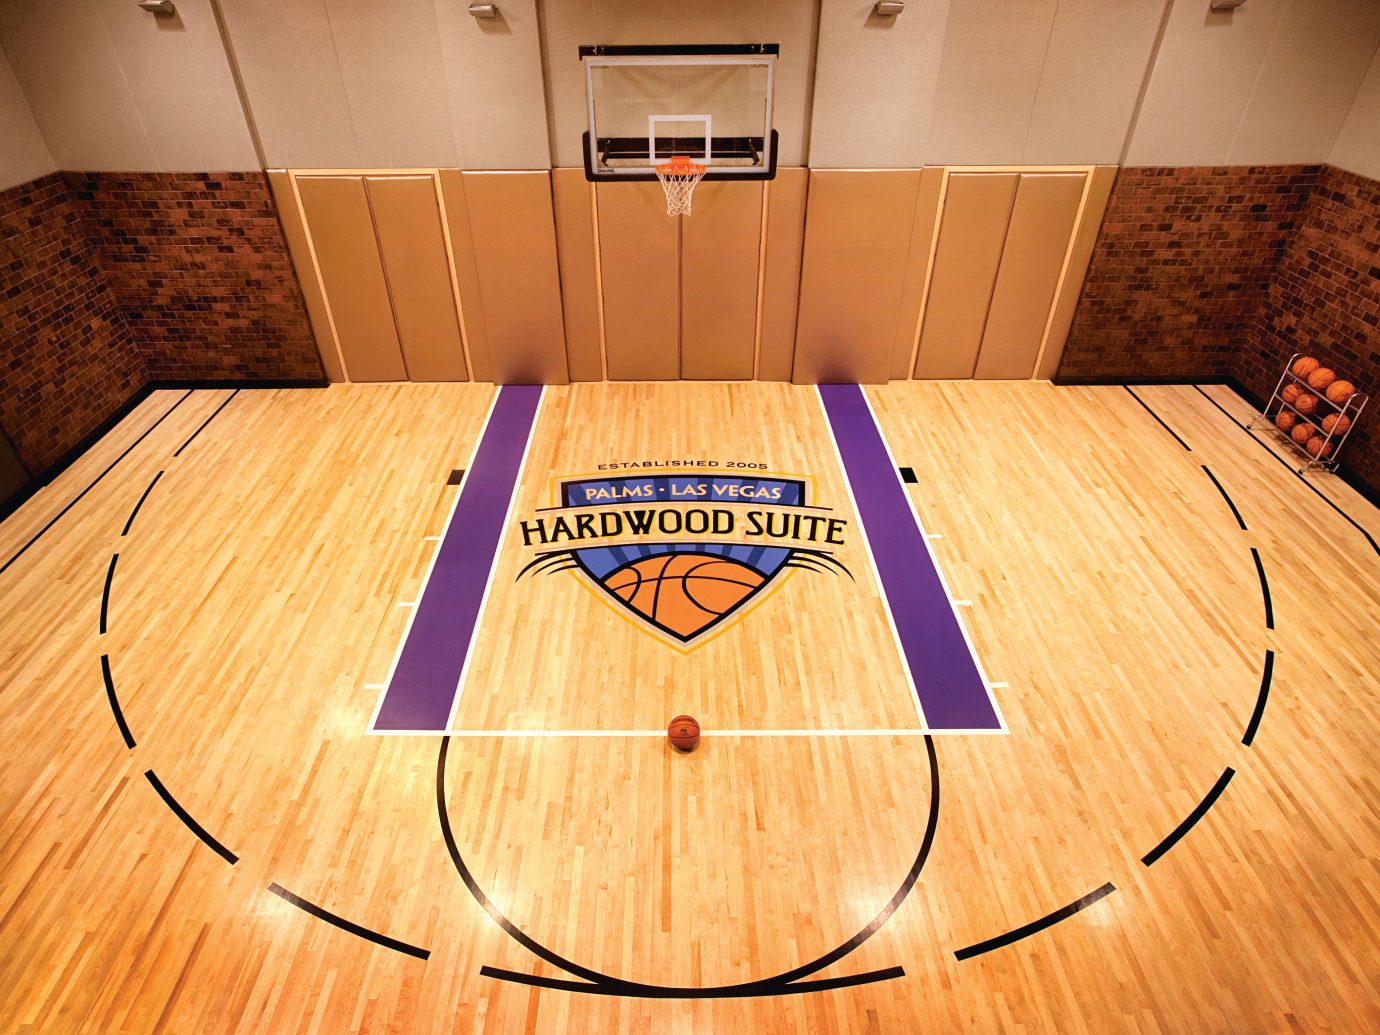 Private basketball court in the Hardwood Suite, Palms Casino Resort